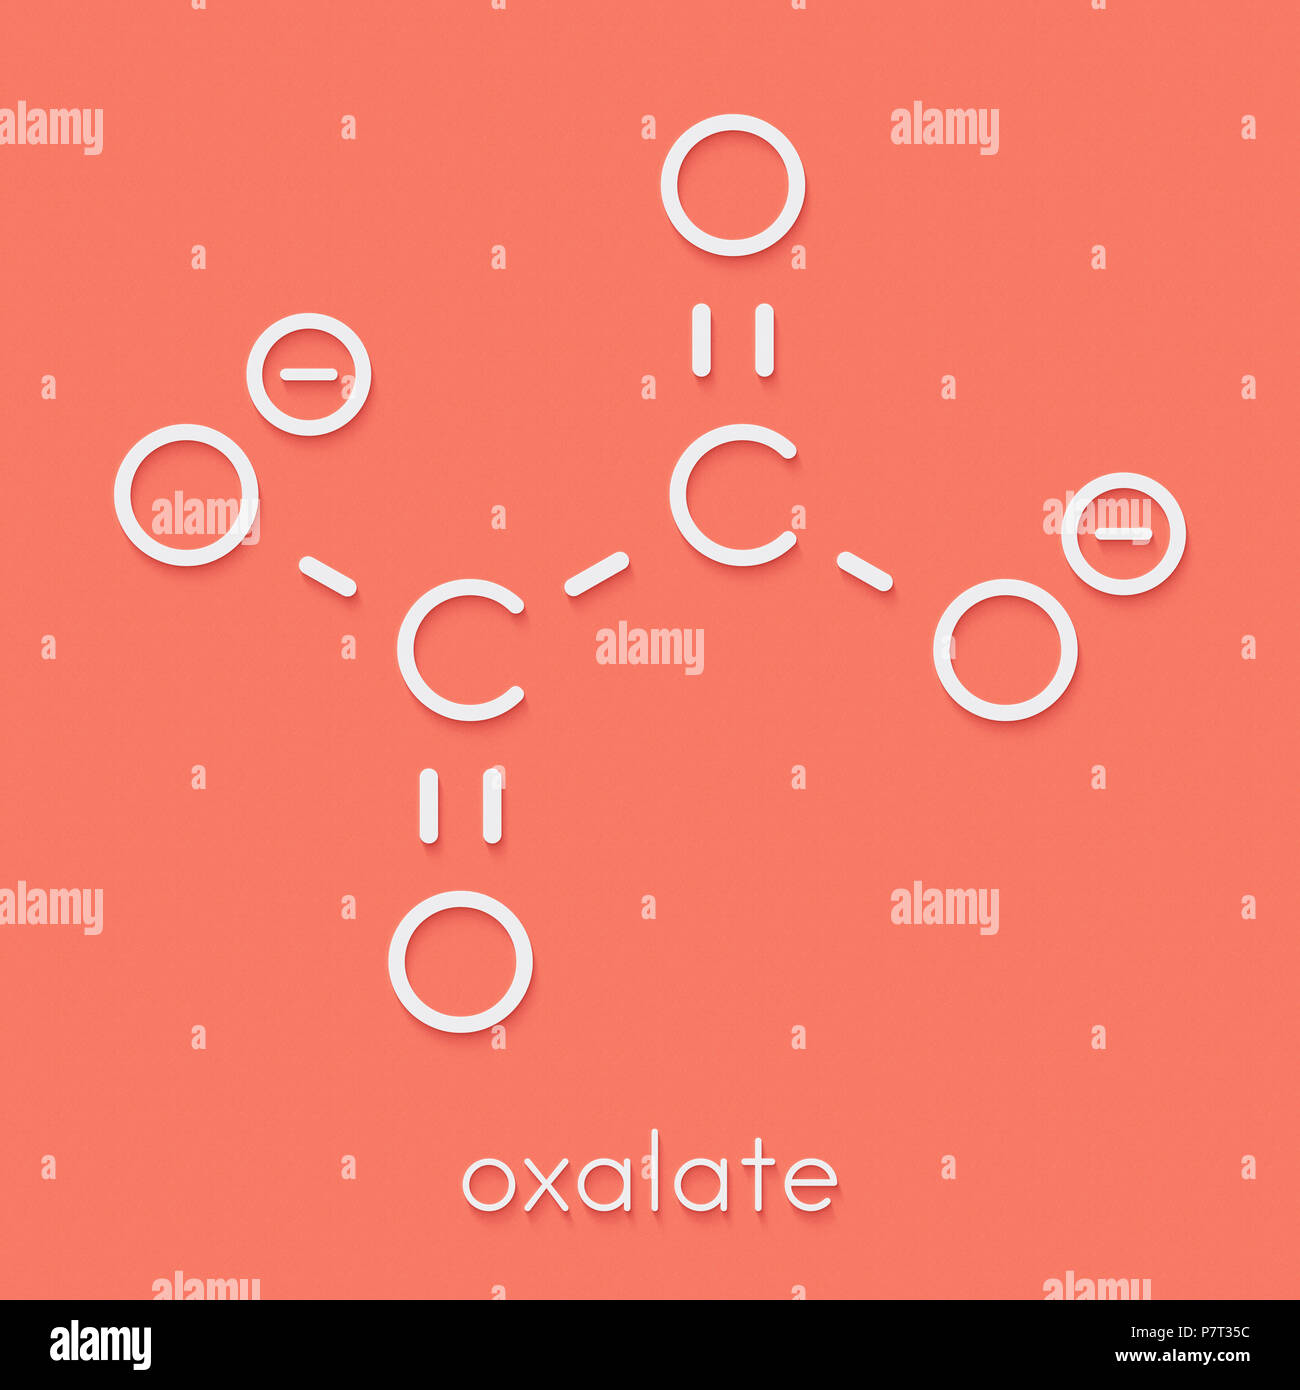 Oxalate anion, chemical structure. Oxalate salts can form kidney stones. Skeletal formula. Stock Photo